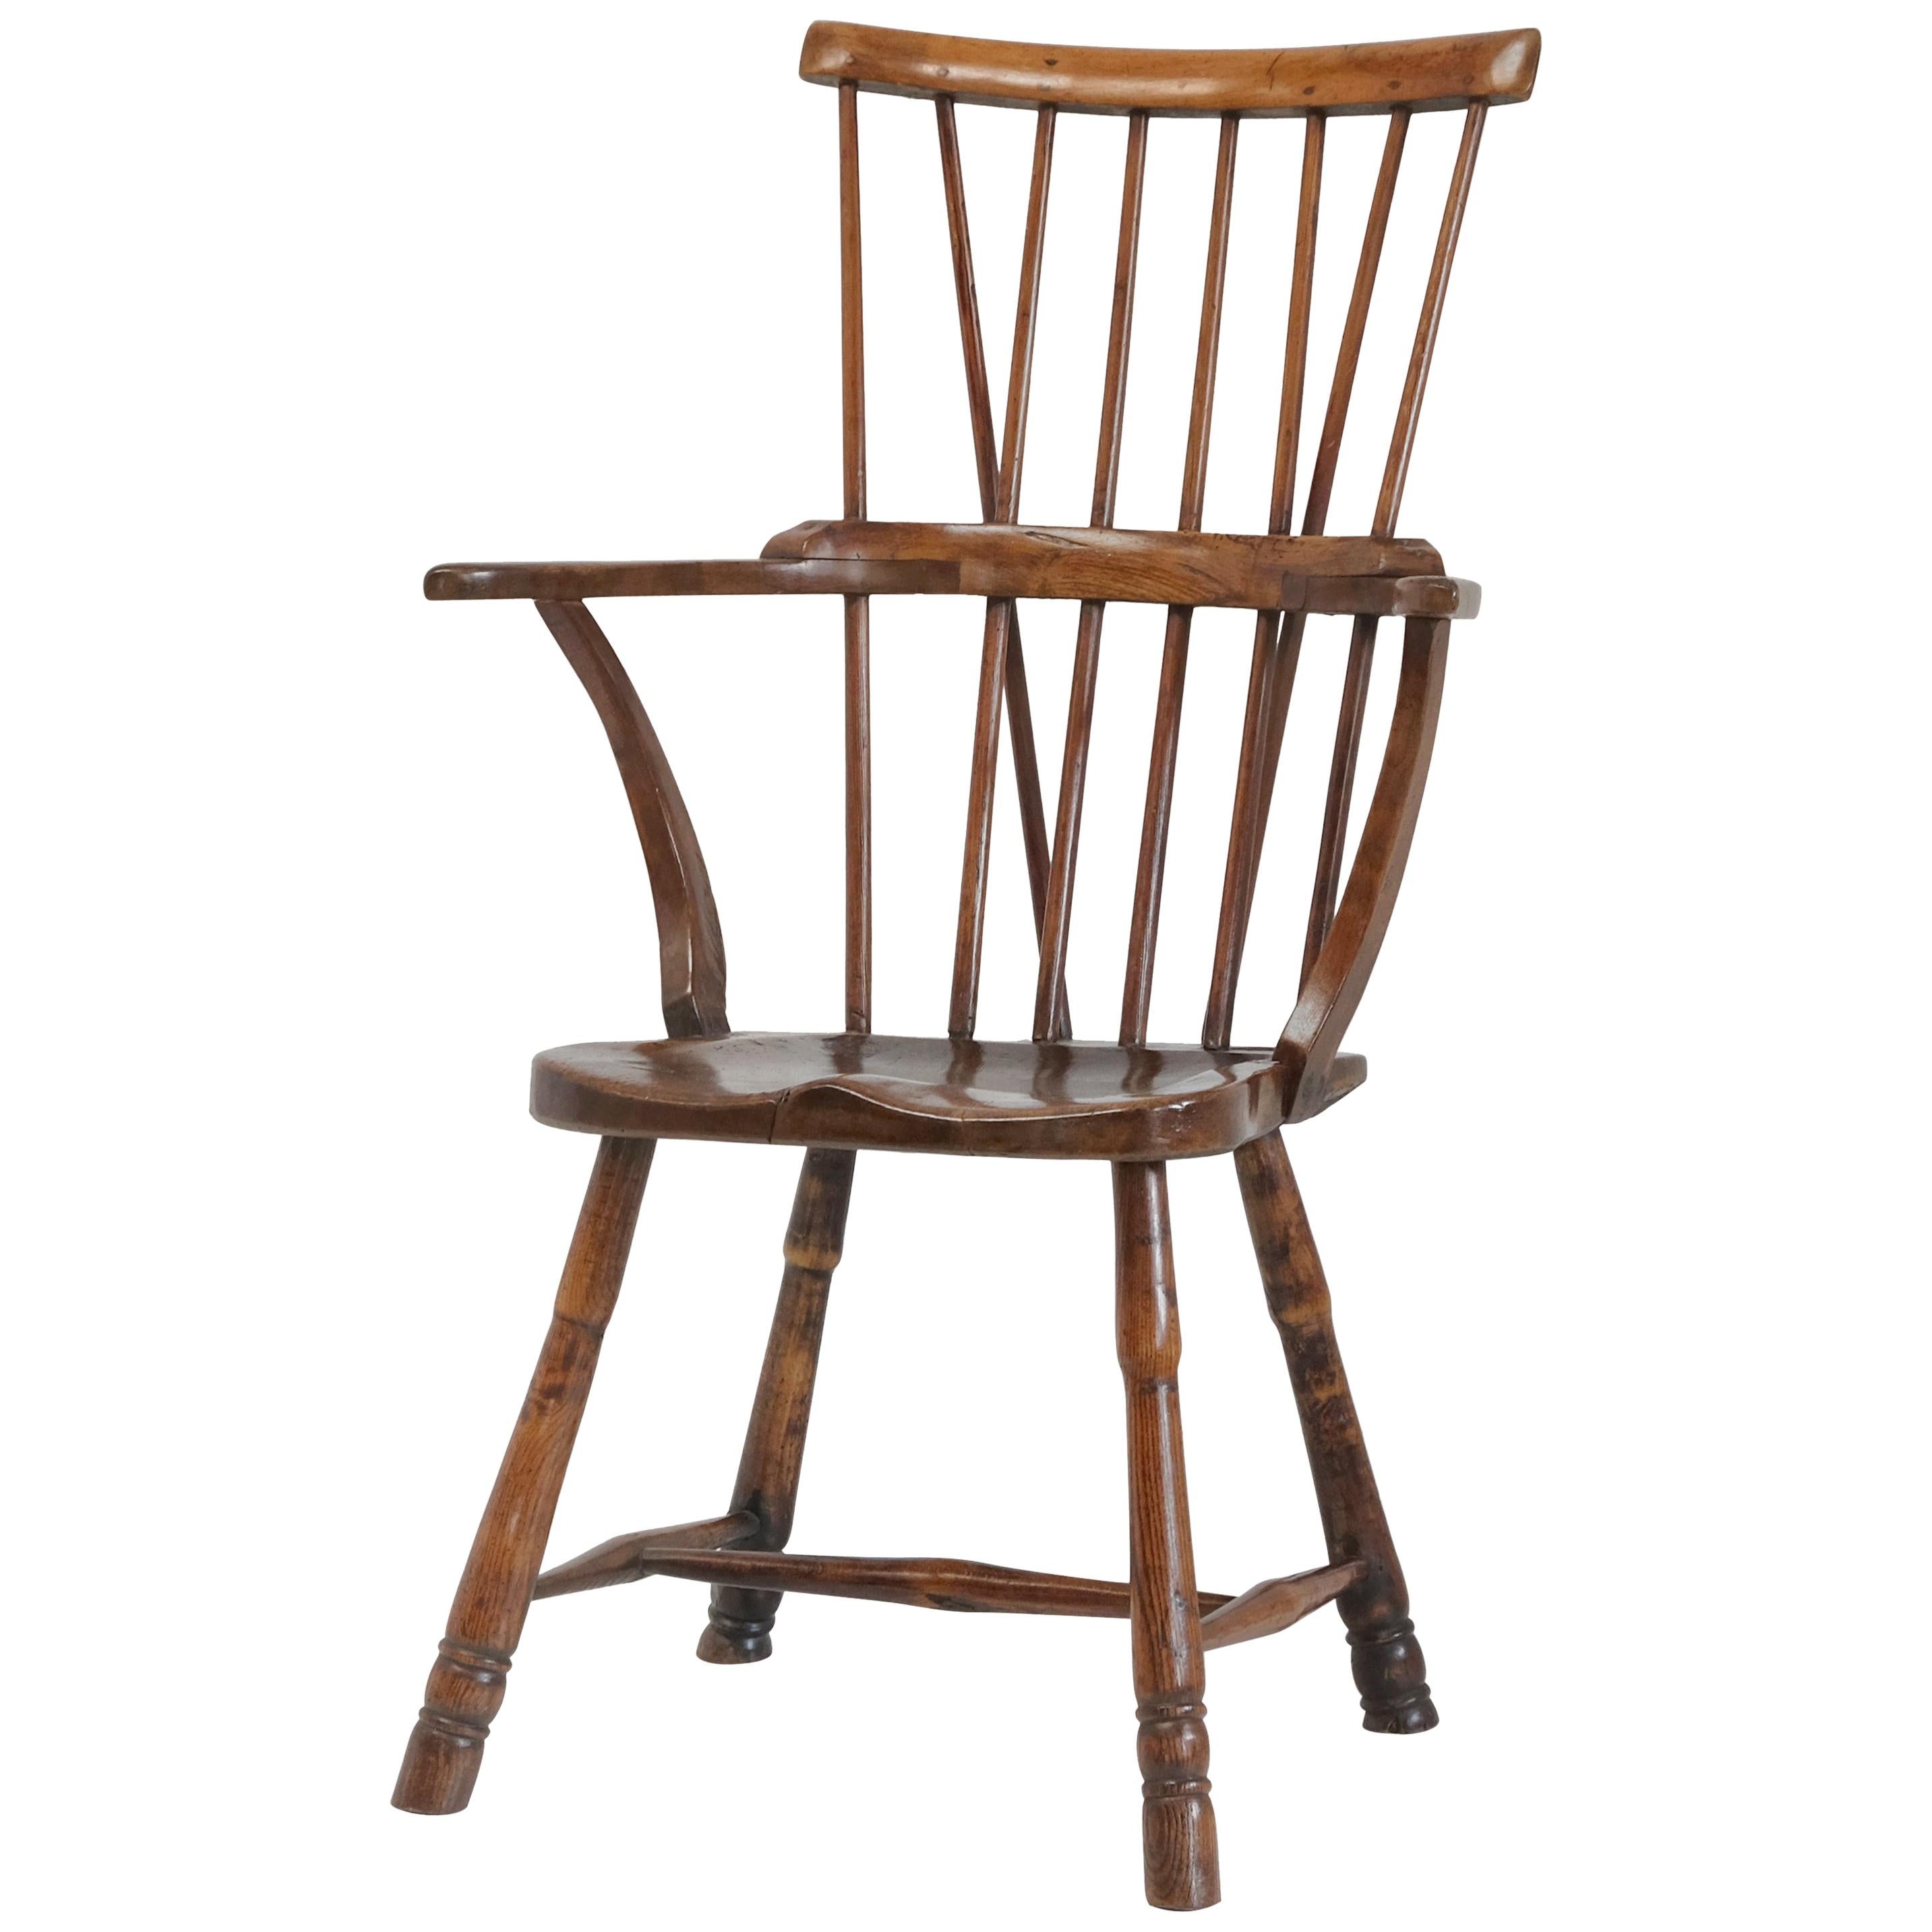 English Comb Back Windsor Chair, West Country, Rustic Primitive Armchair Elm Ash